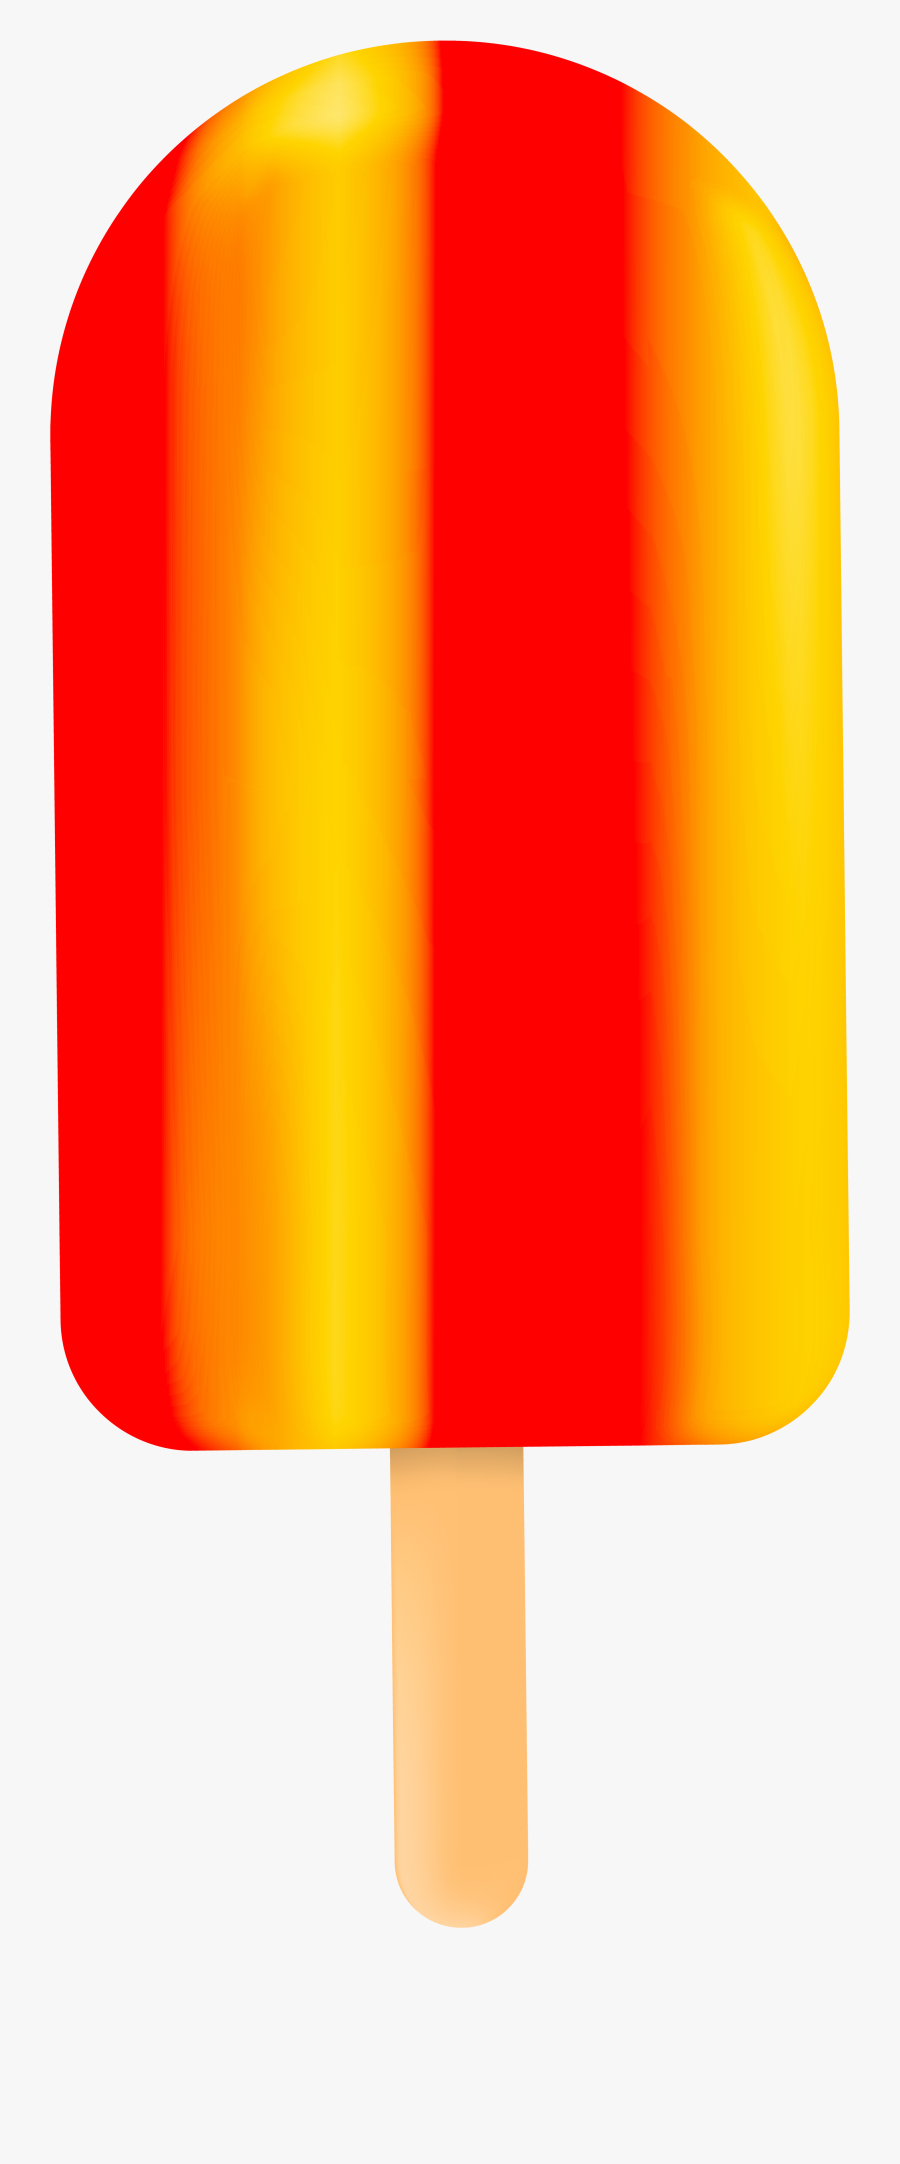 Ice Cream Bar Red Yellow Png Clip Art - Red And Yellow Ice Cream, Transparent Clipart